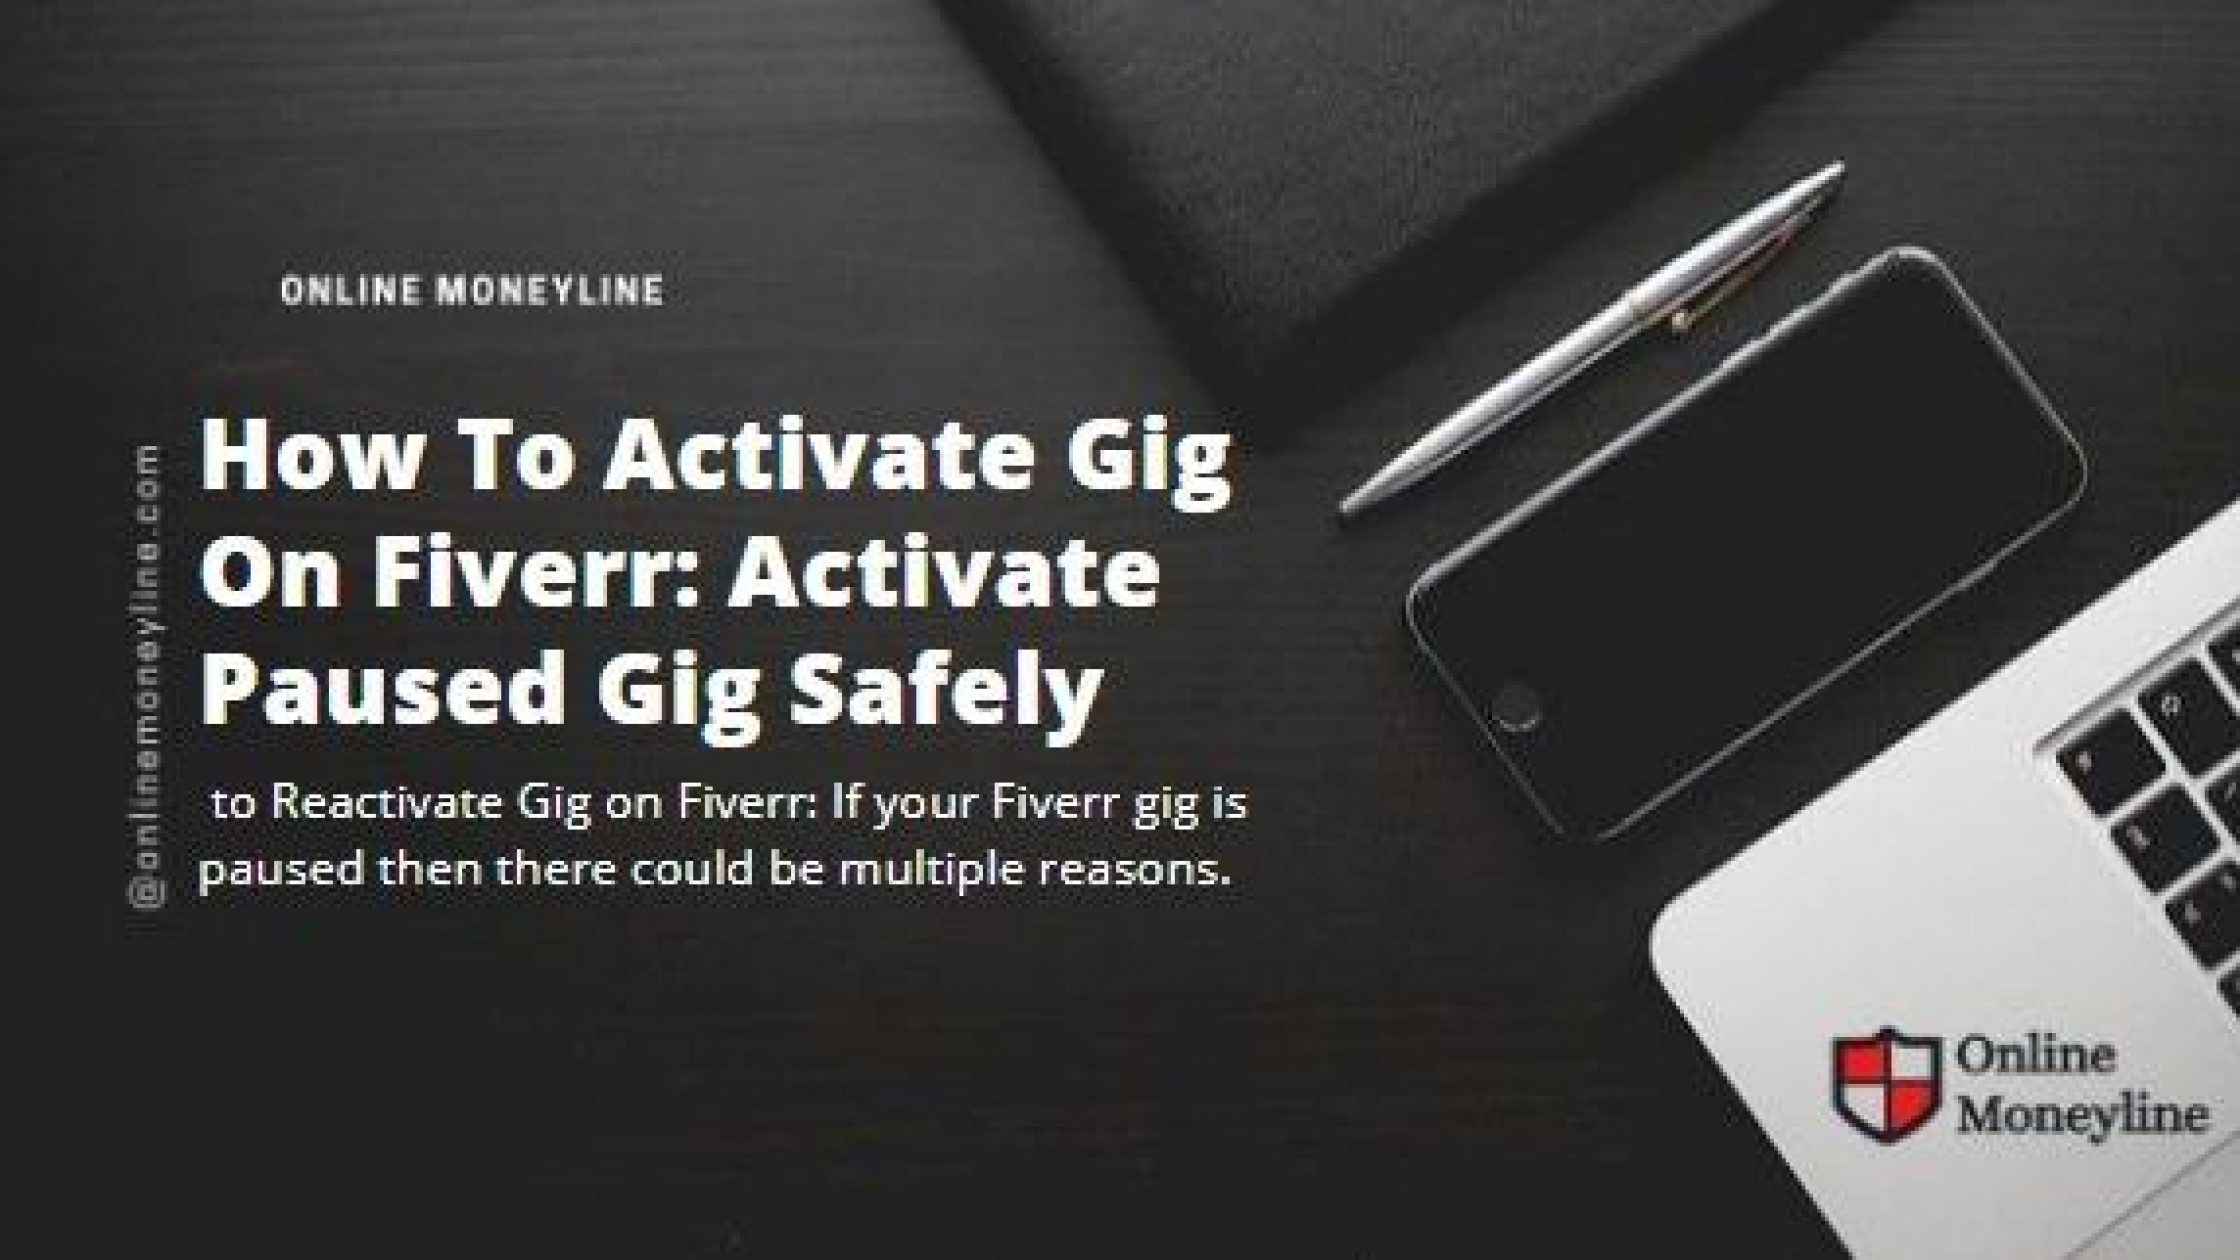 How To Activate Gig On Fiverr: Activate Paused Gig Safely